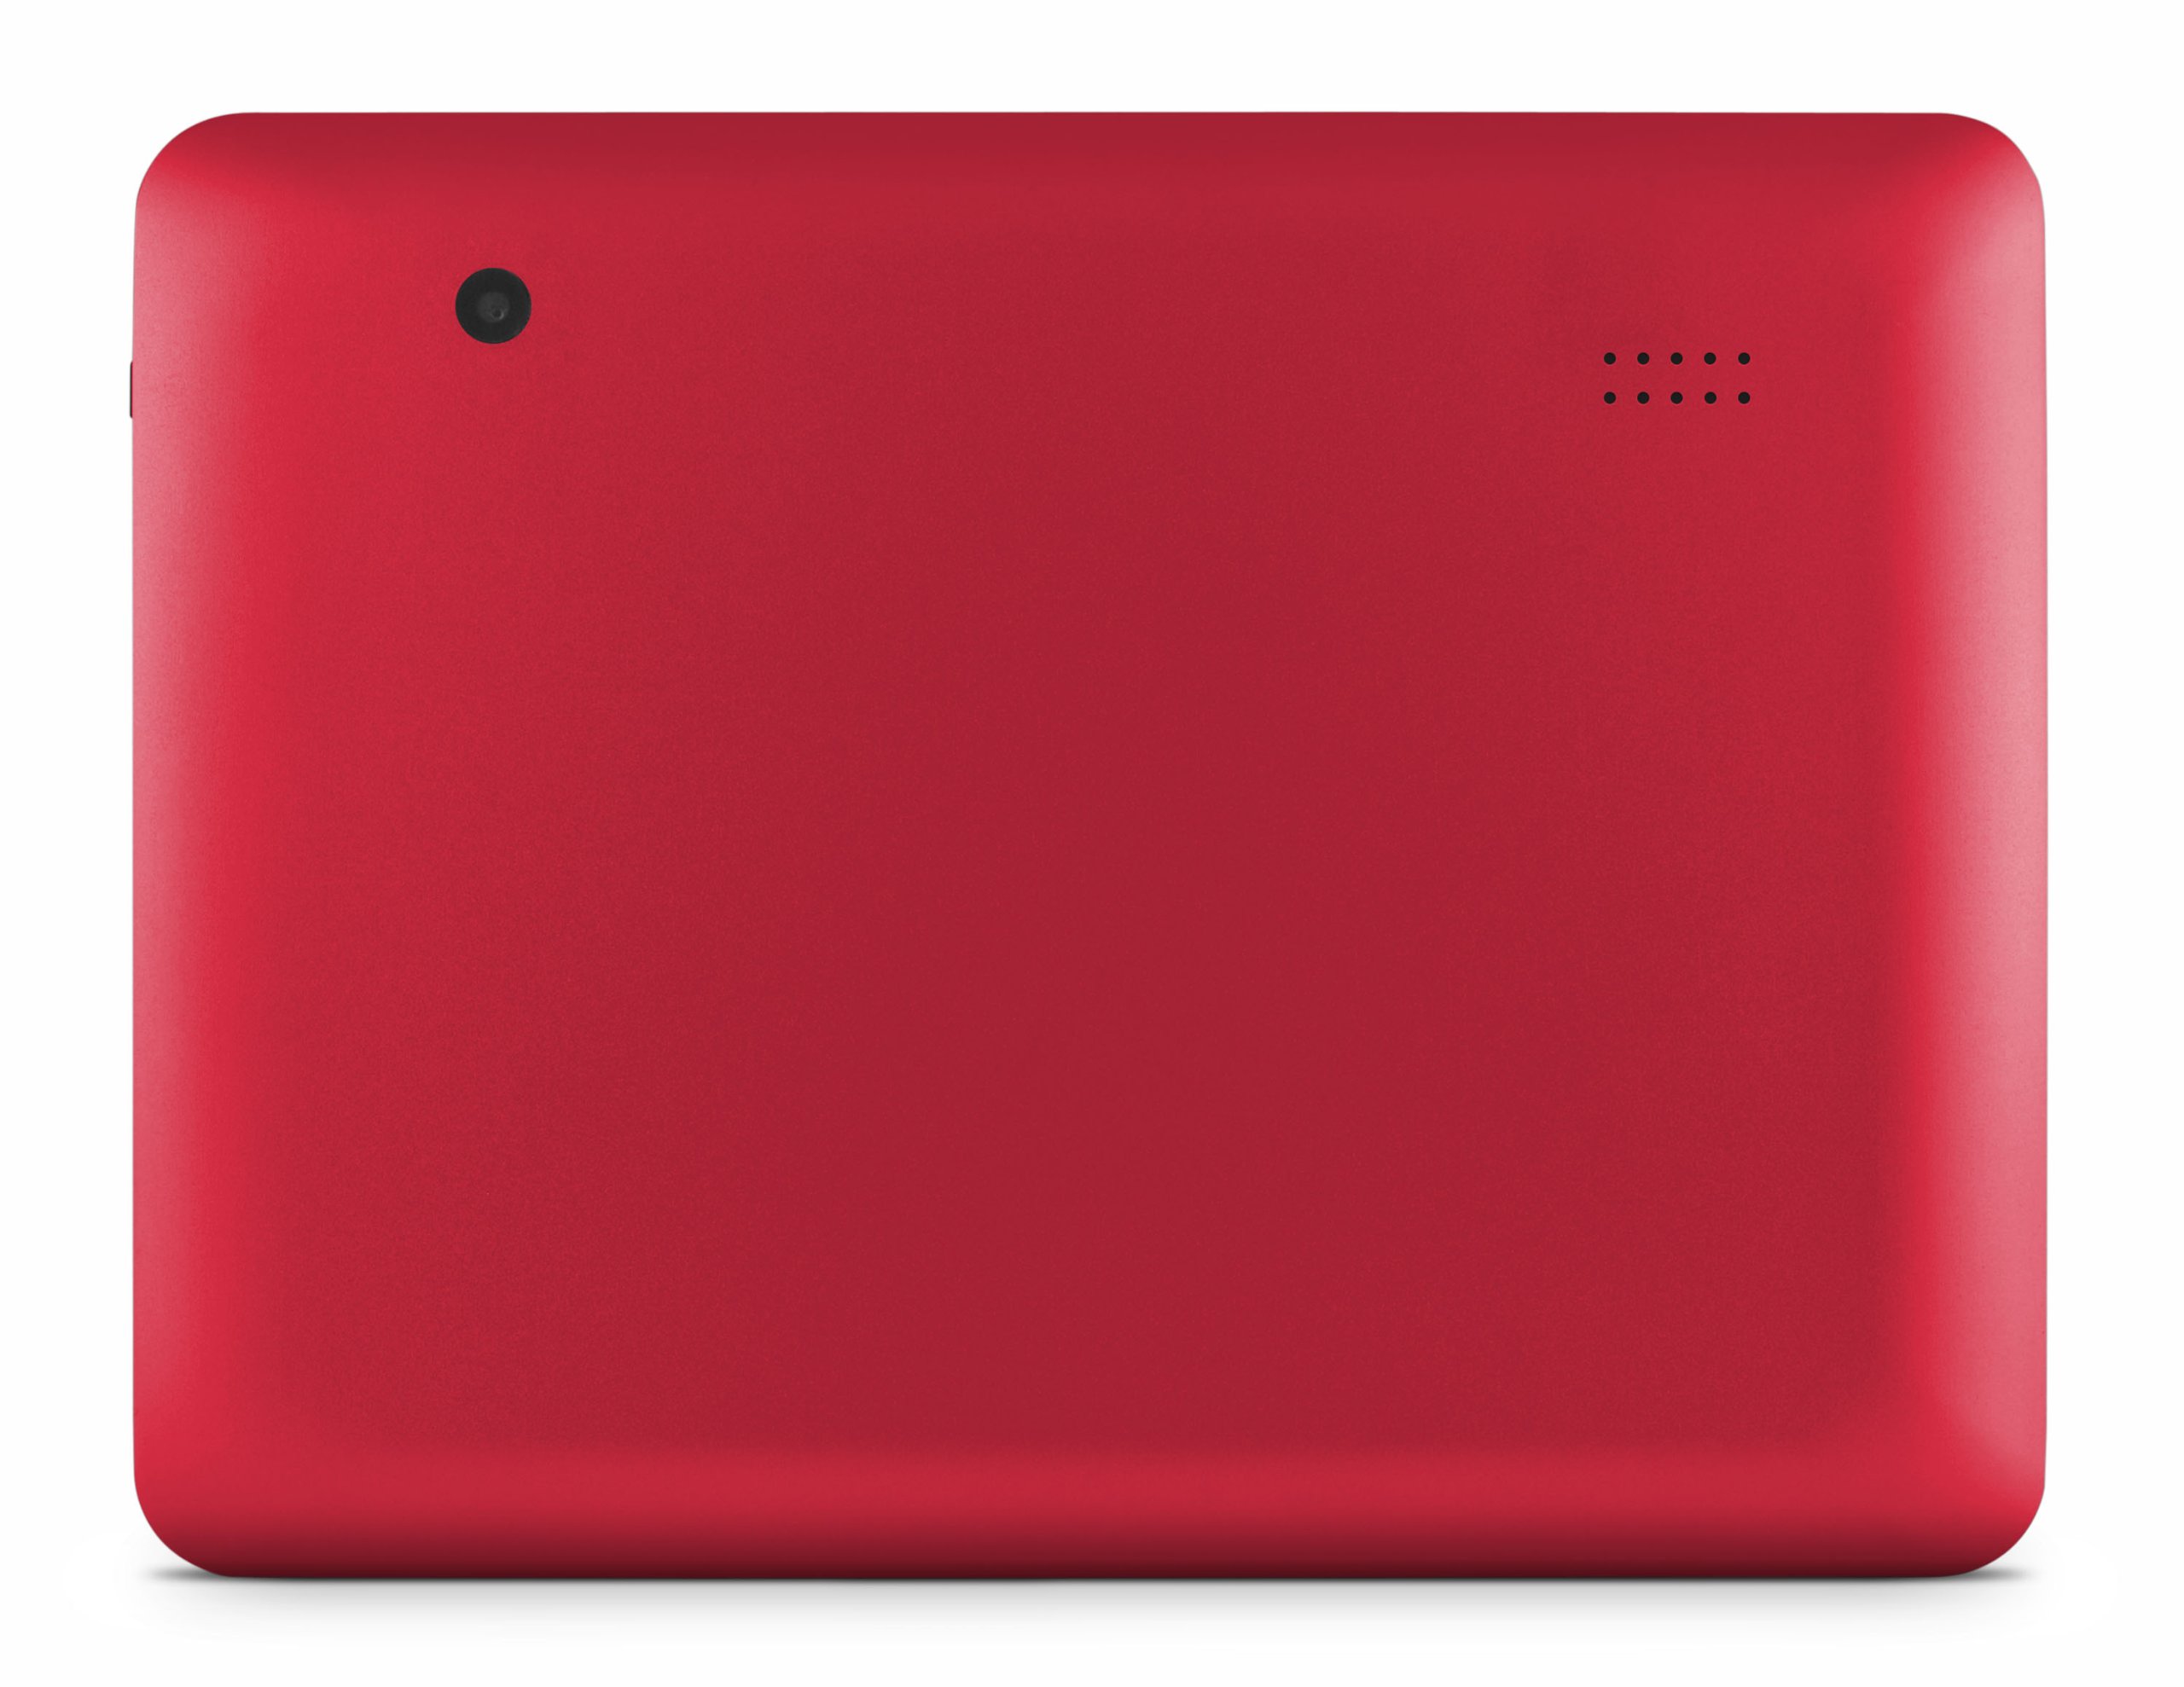 Ematic EGP008RD 8.0-Inch 8GB Pro Multi-Touch Tablet with Android 4.1 Jelly Bean (Red)